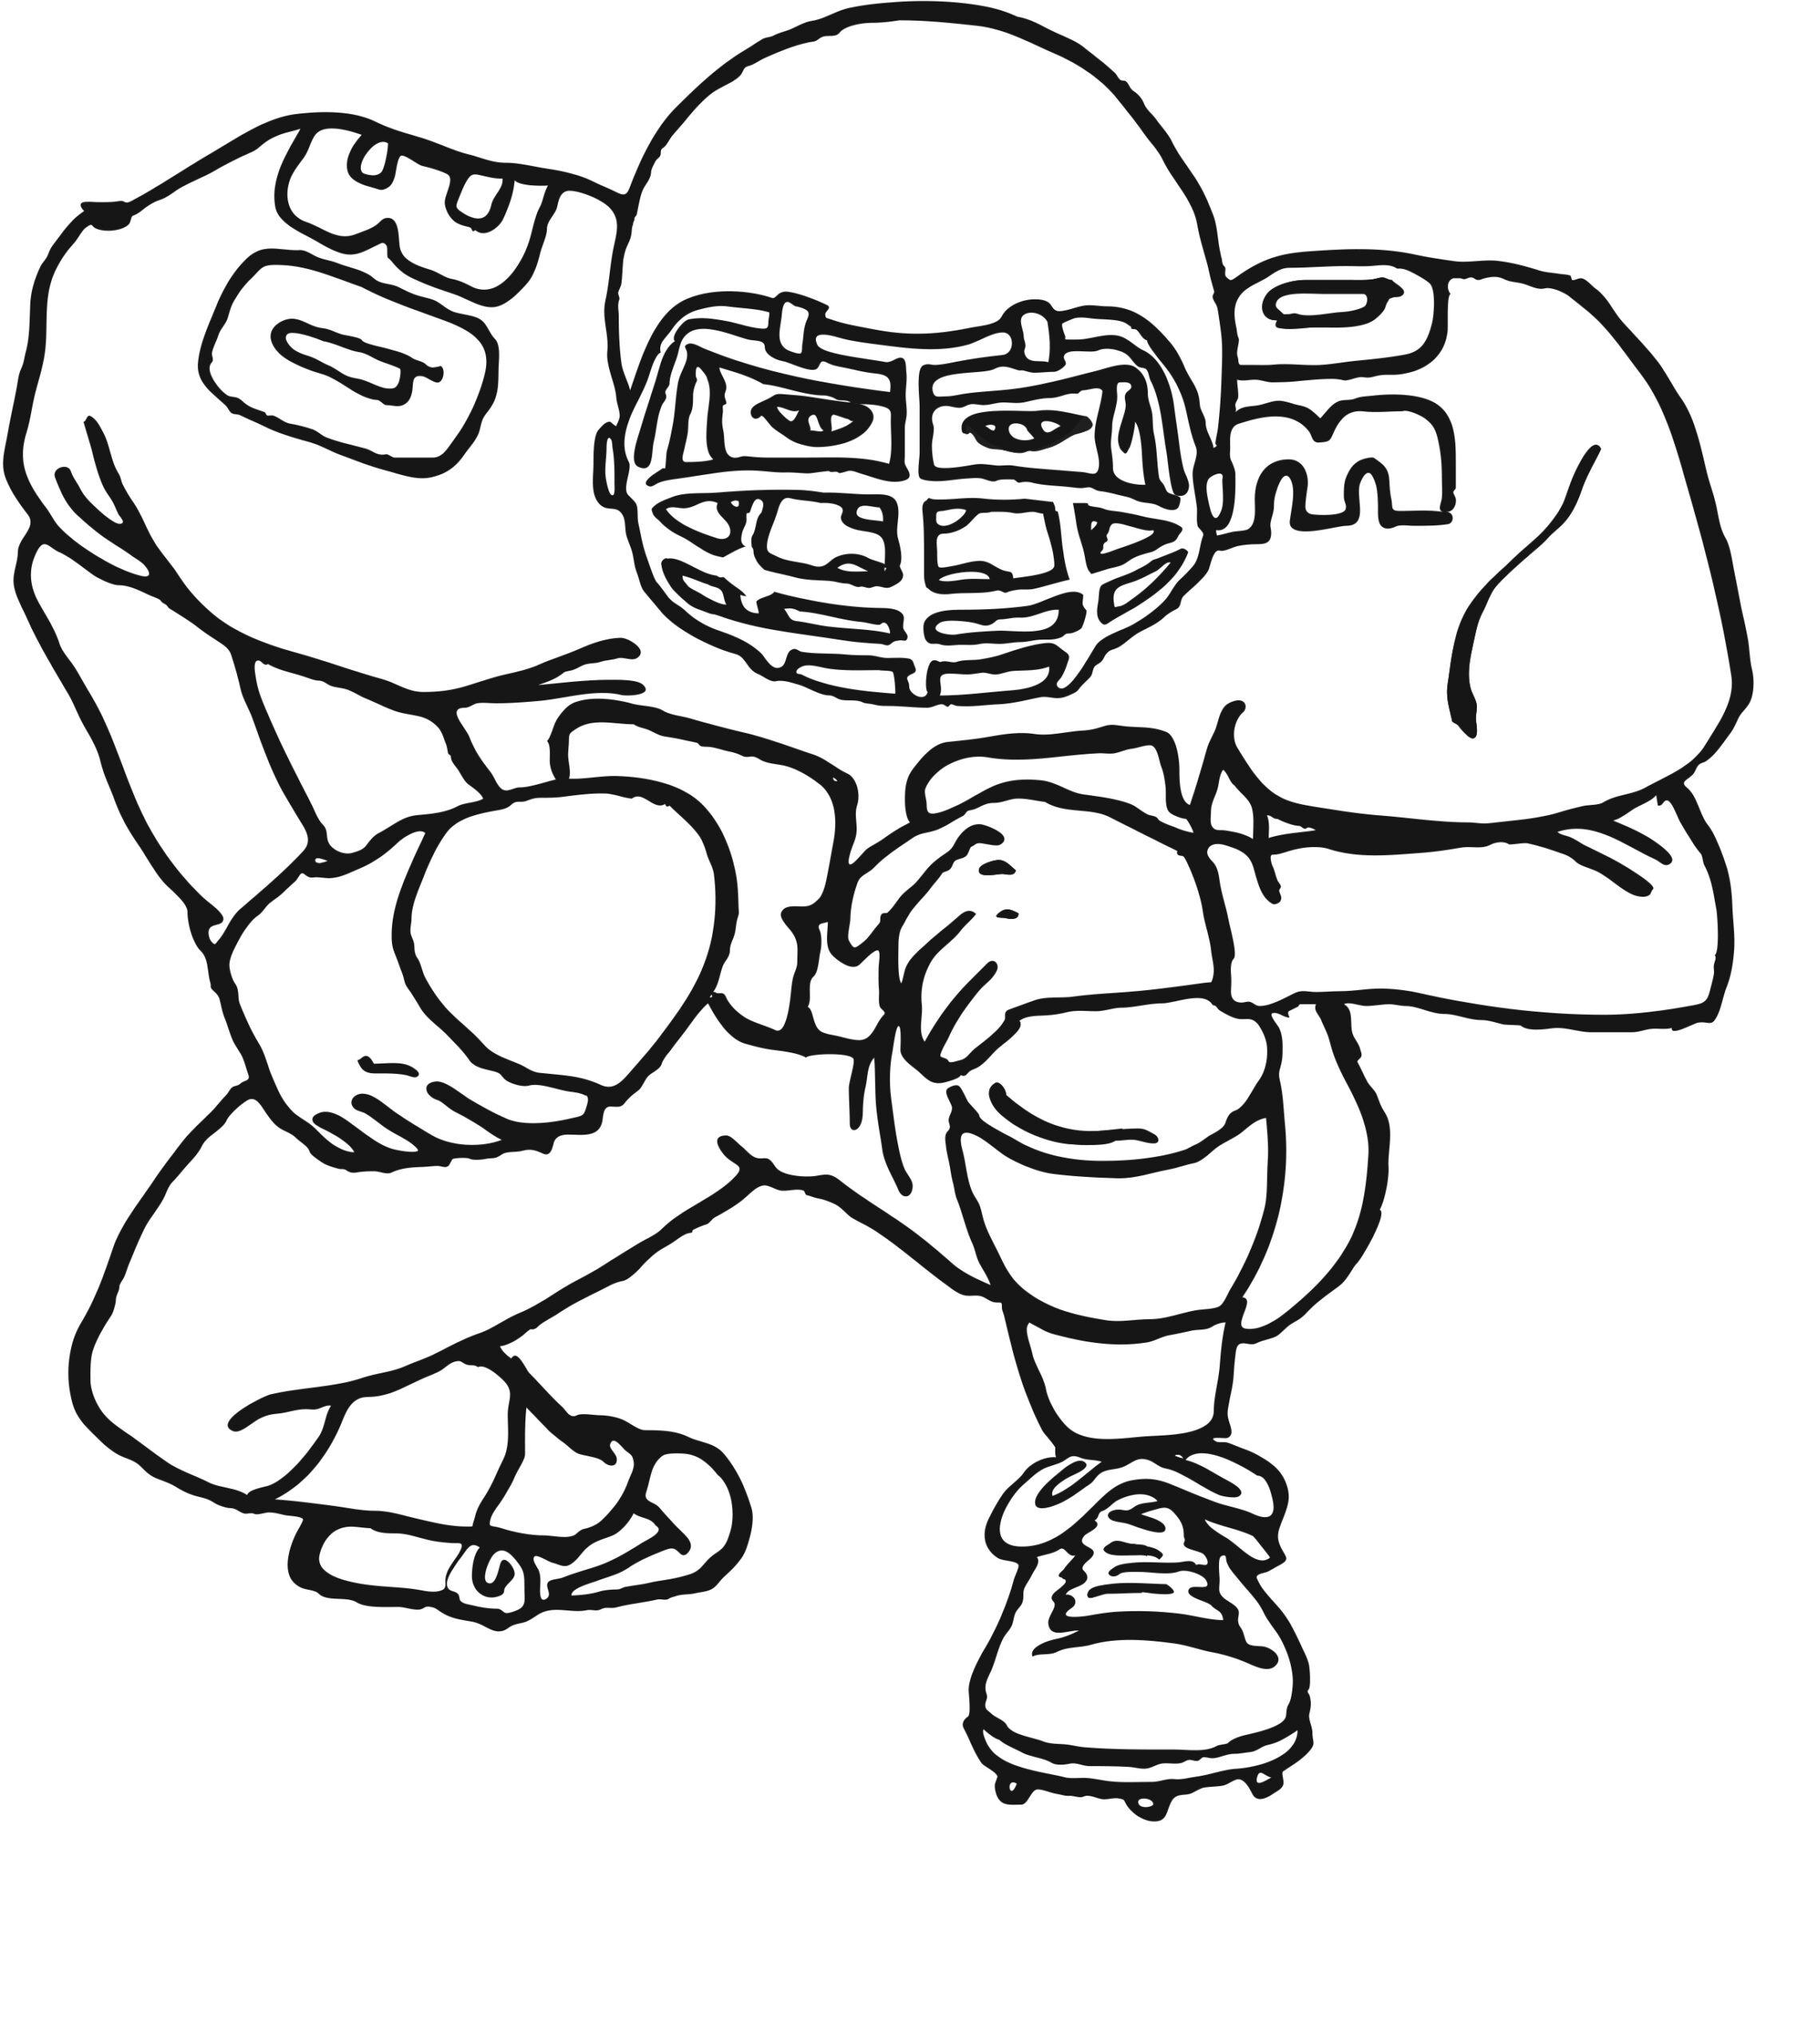 Free Printable Football Coloring Pages For Kids Best Coloring Pages 